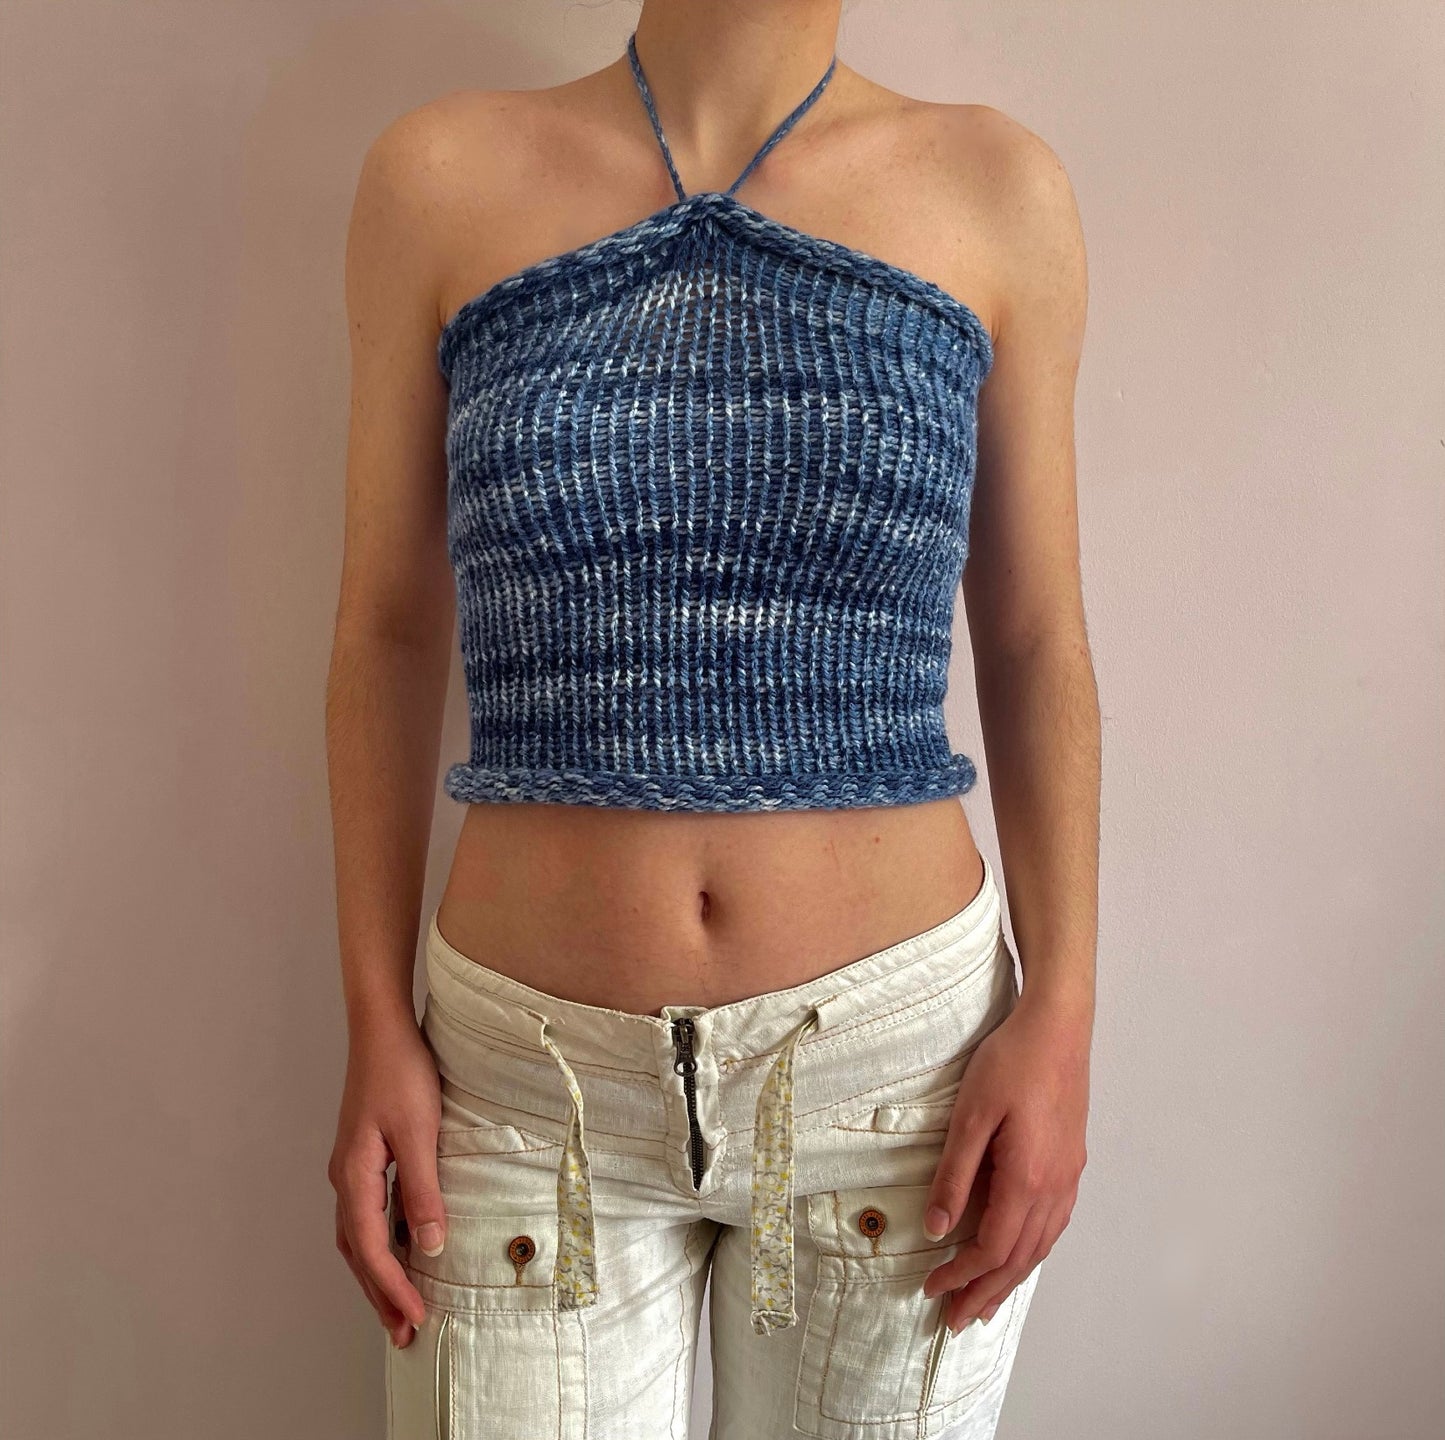 Handmade knitted halter top in blue and white